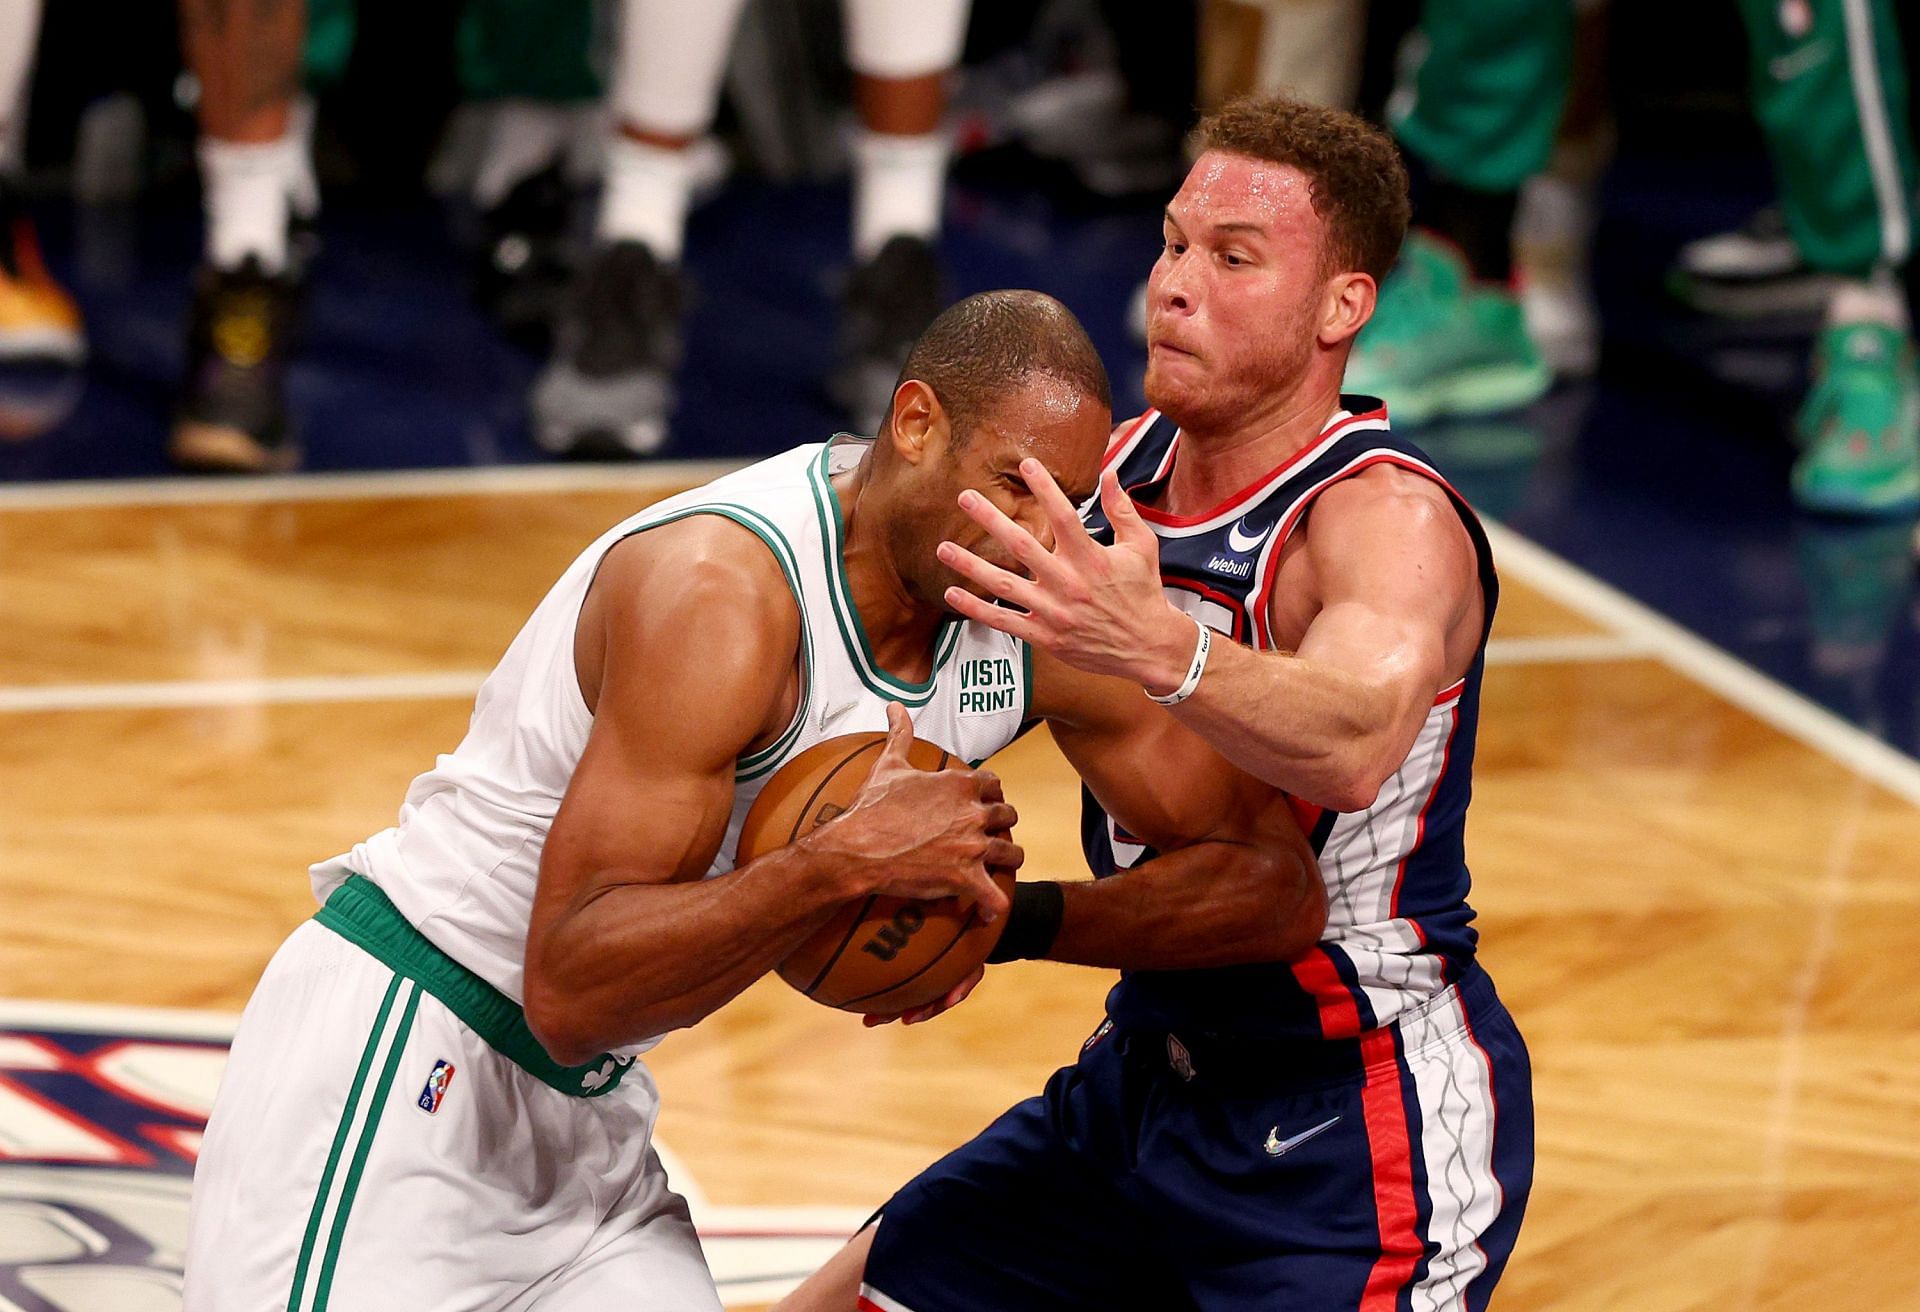 Al Horford of the Boston Celtics (left) tussles for the basketball with Blake Griffin